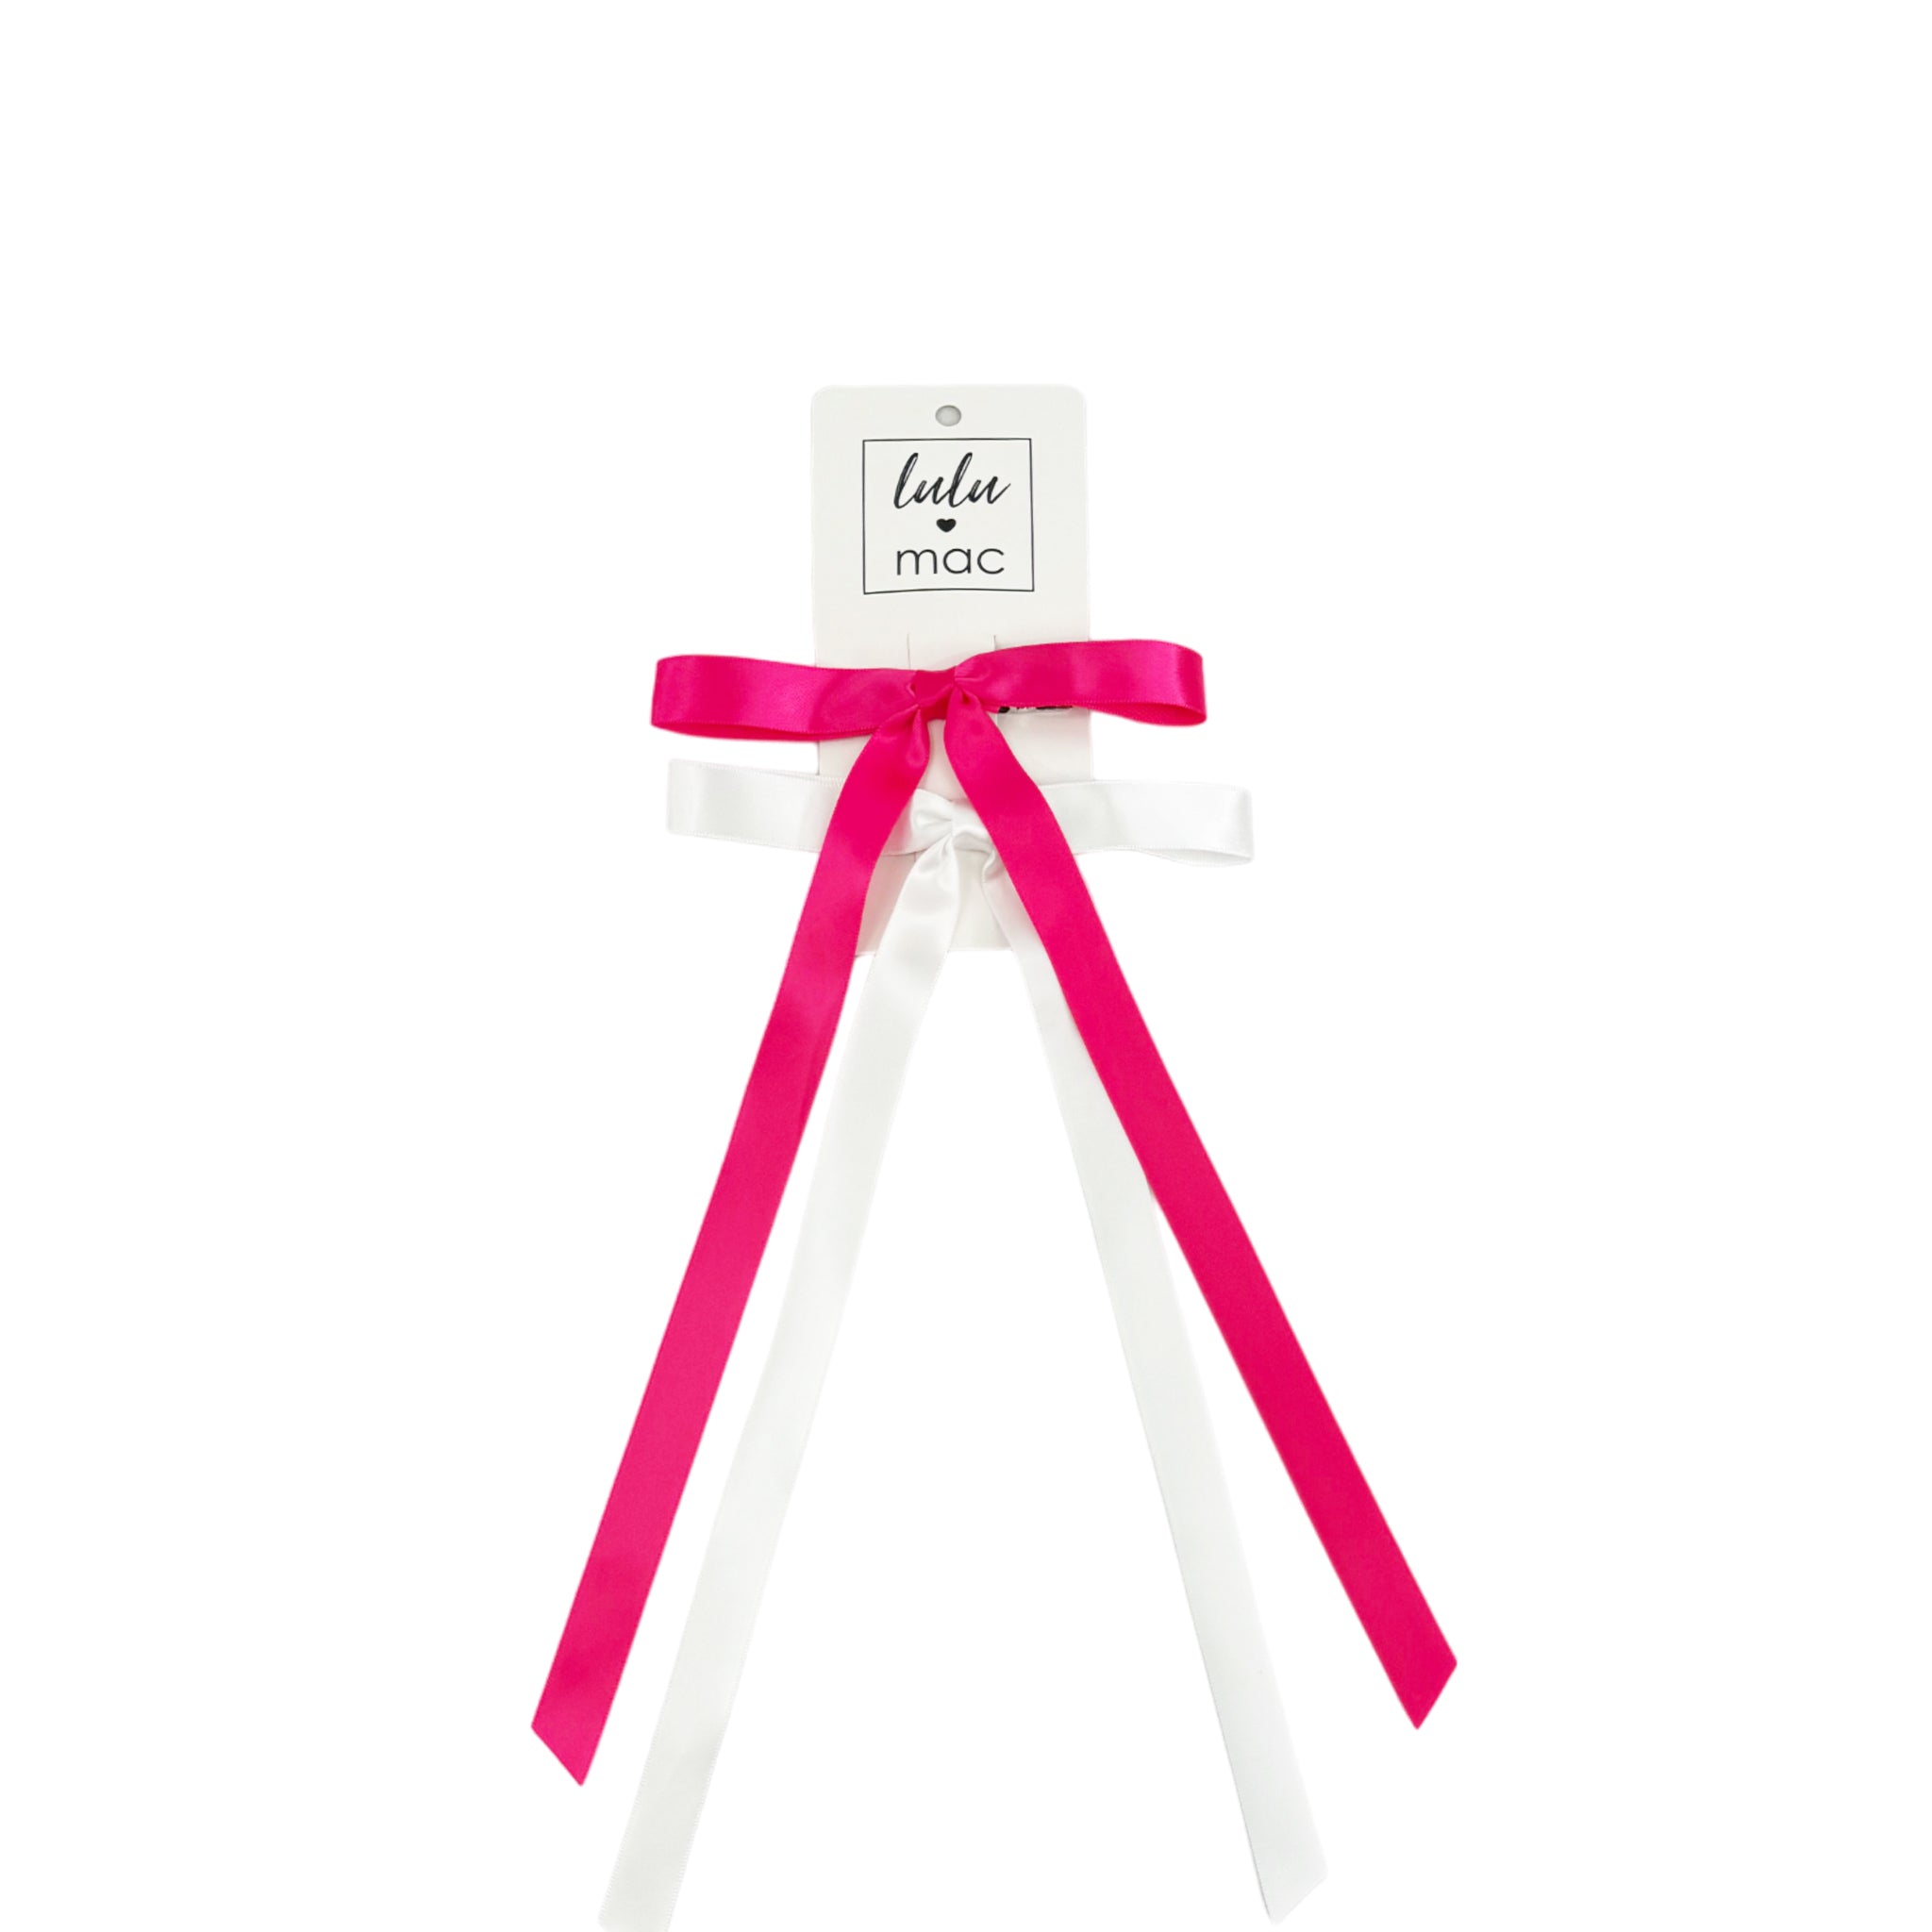 DDM-7656 Satin Mini Double Bow  Hot Pink/White